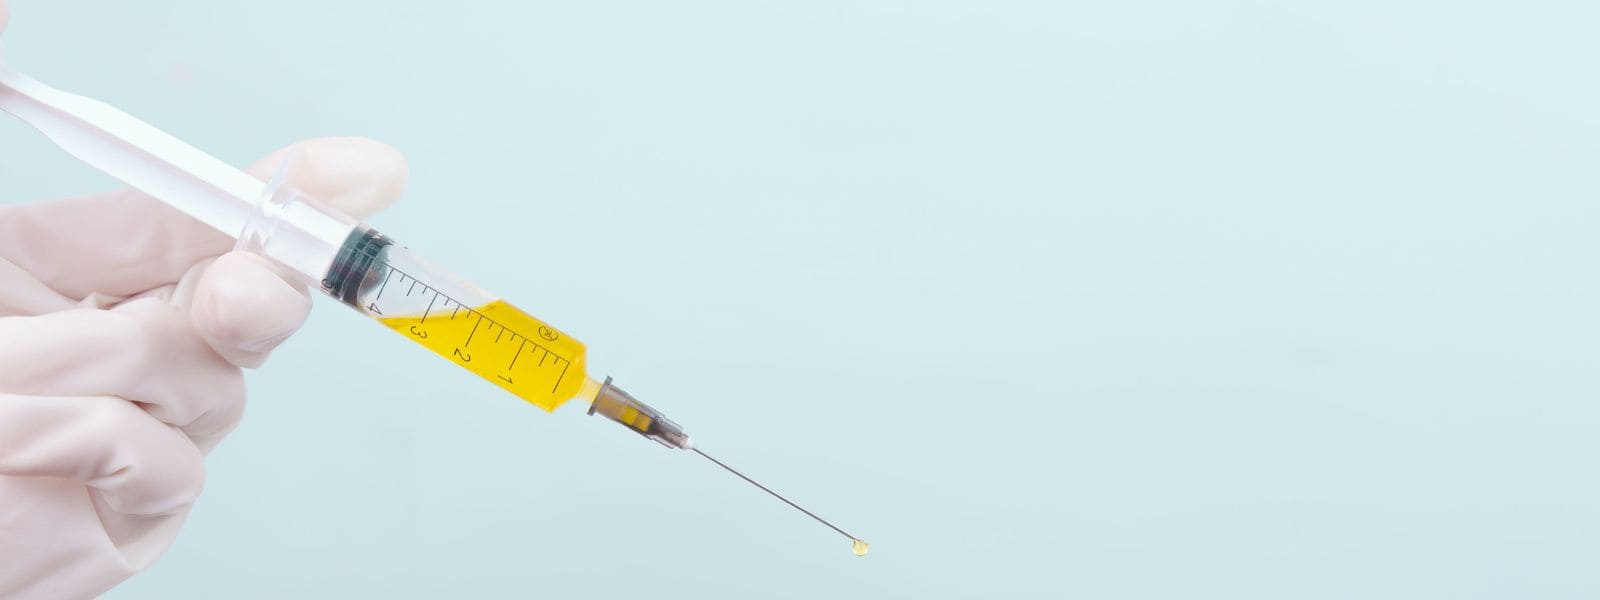 an image of a syringe filled with yellow lemon bottle solution